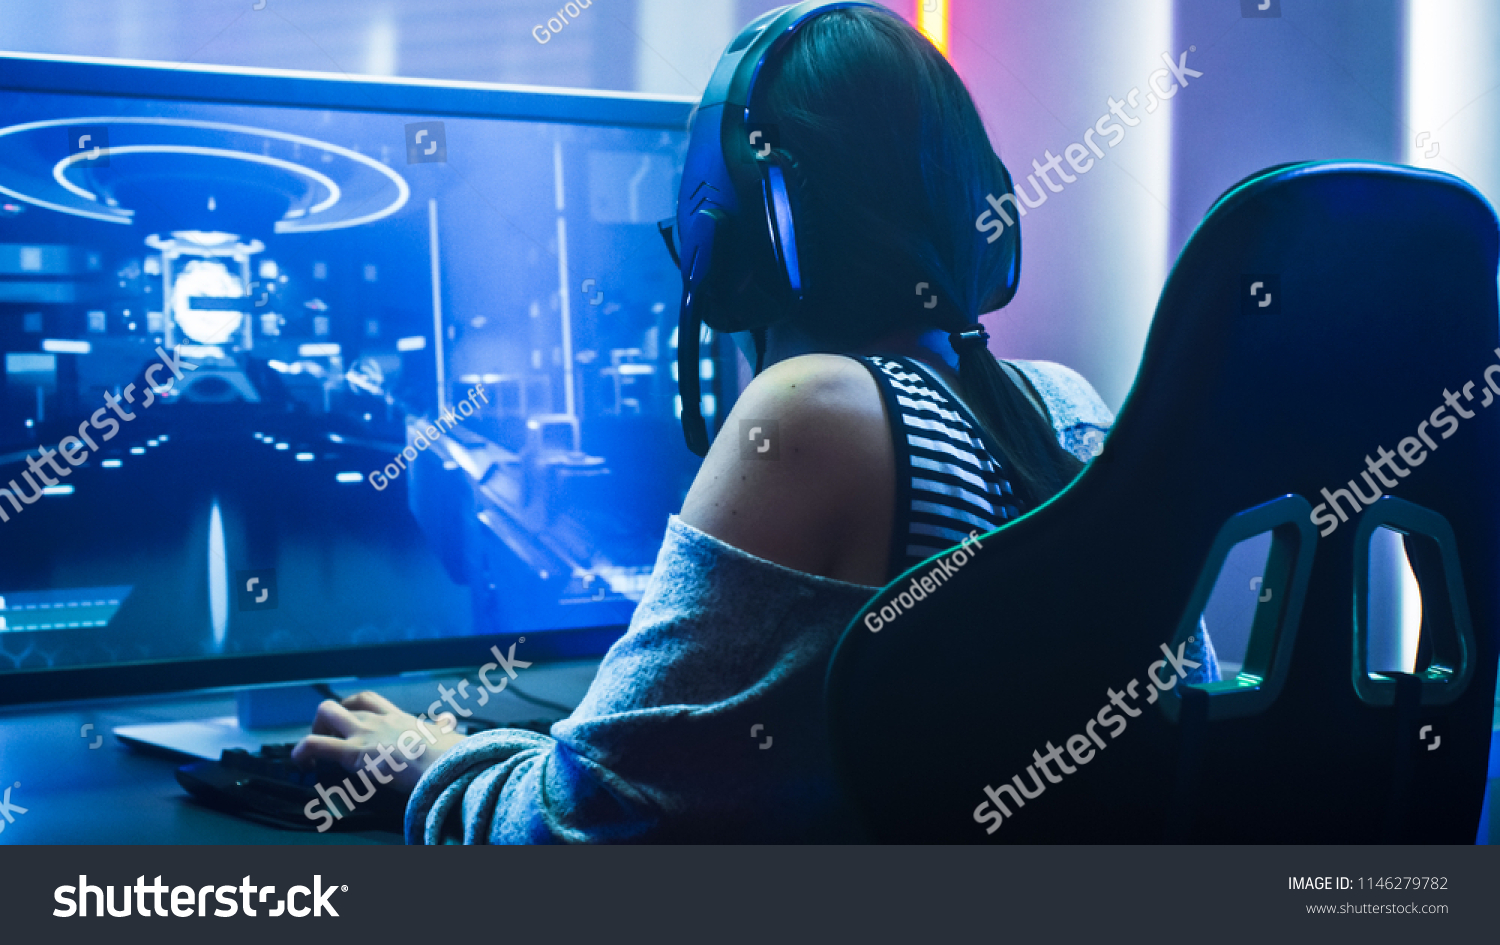 Shot of the Beautiful Pro Gamer Girl Playing in First-Person Shooter Online Video Game on Her Personal Computer. Casual Cute Geek wearing Glasses and Headset. Neon Room. eSport Cyber Games Internet #1146279782